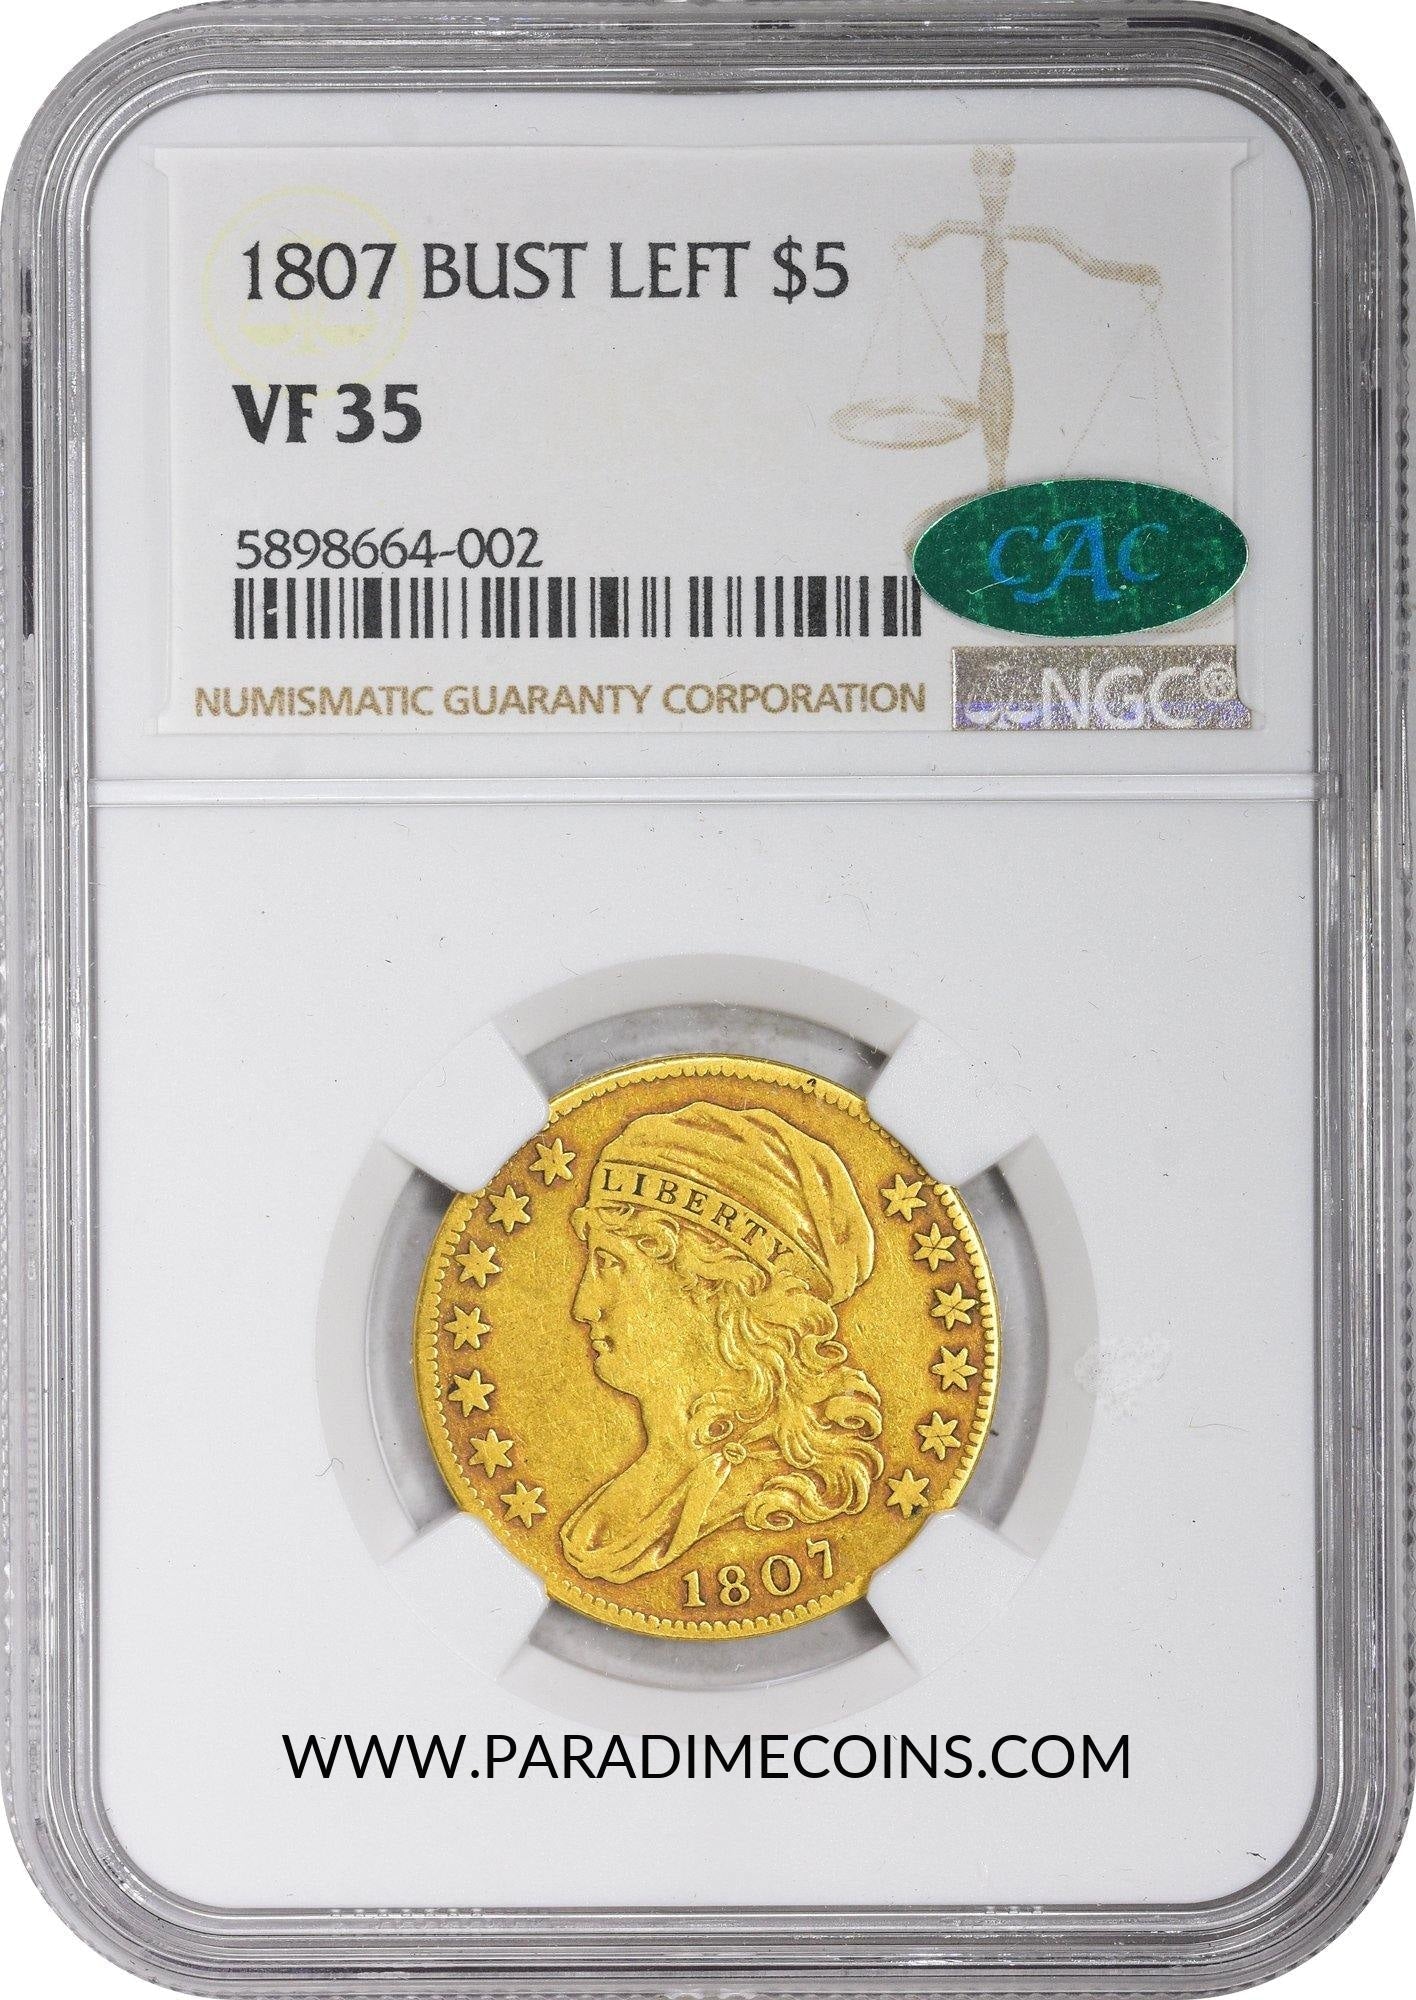 1807 $5 Capped Bust Left VF35 NGC CAC - Paradime Coins | PCGS NGC CACG CAC Rare US Numismatic Coins For Sale